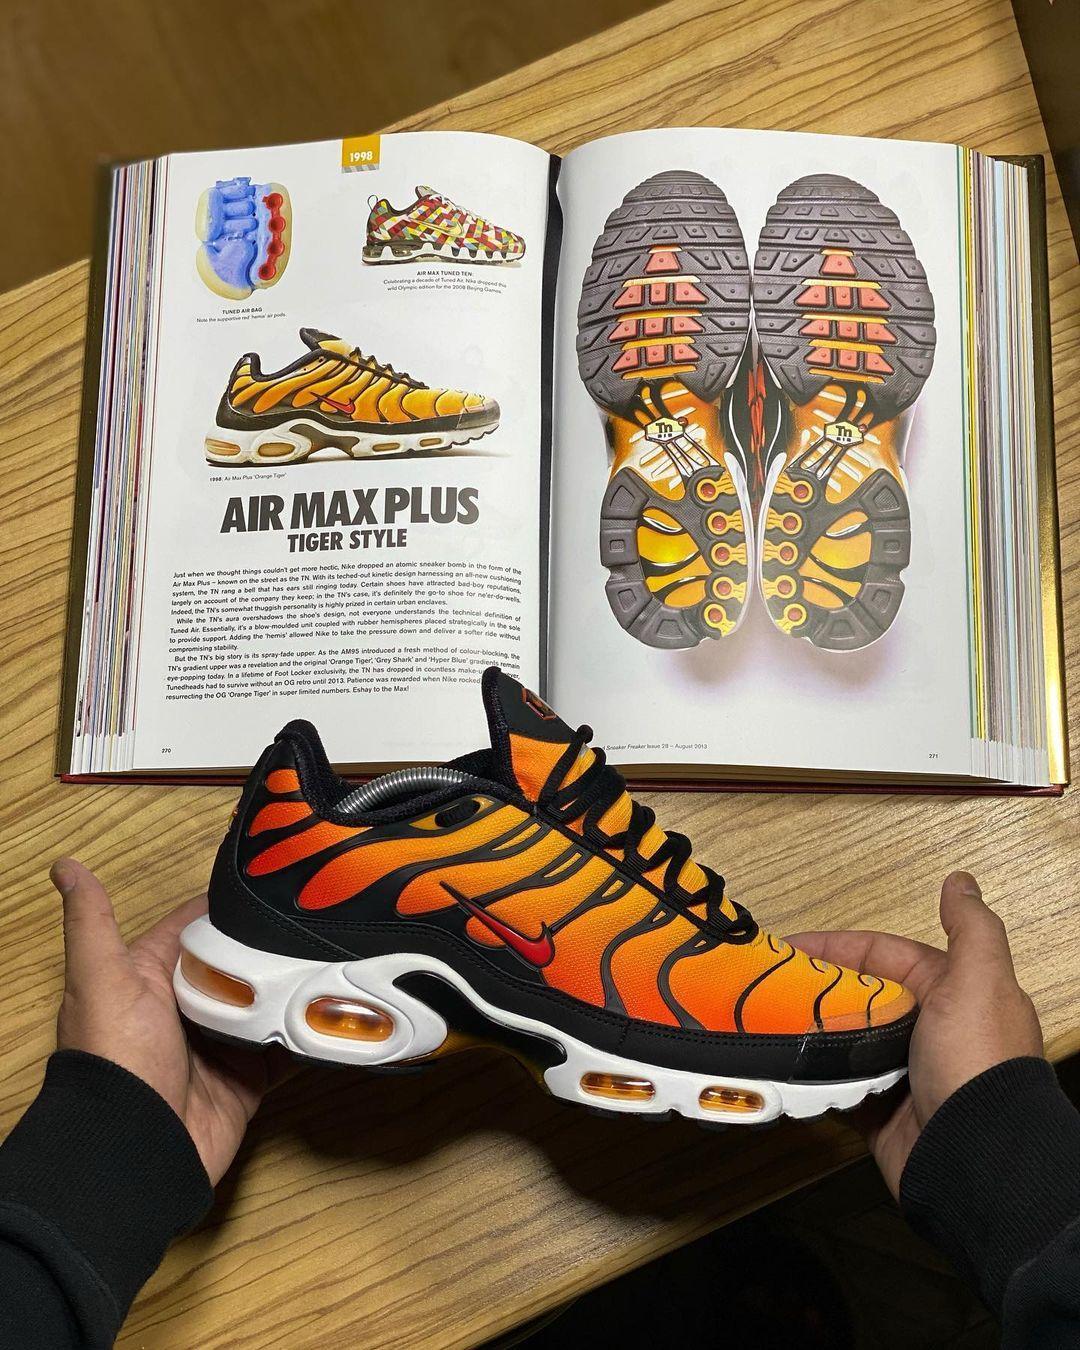 Sneaker Freaker on "Is the Nike Air Max Plus 'Tiger' the best TN colouway? 👑 See what made the list: https://t.co/b2txYScPQl 📸: @ barra_wudja / IG https://t.co/sppbxFCHRZ" / Twitter